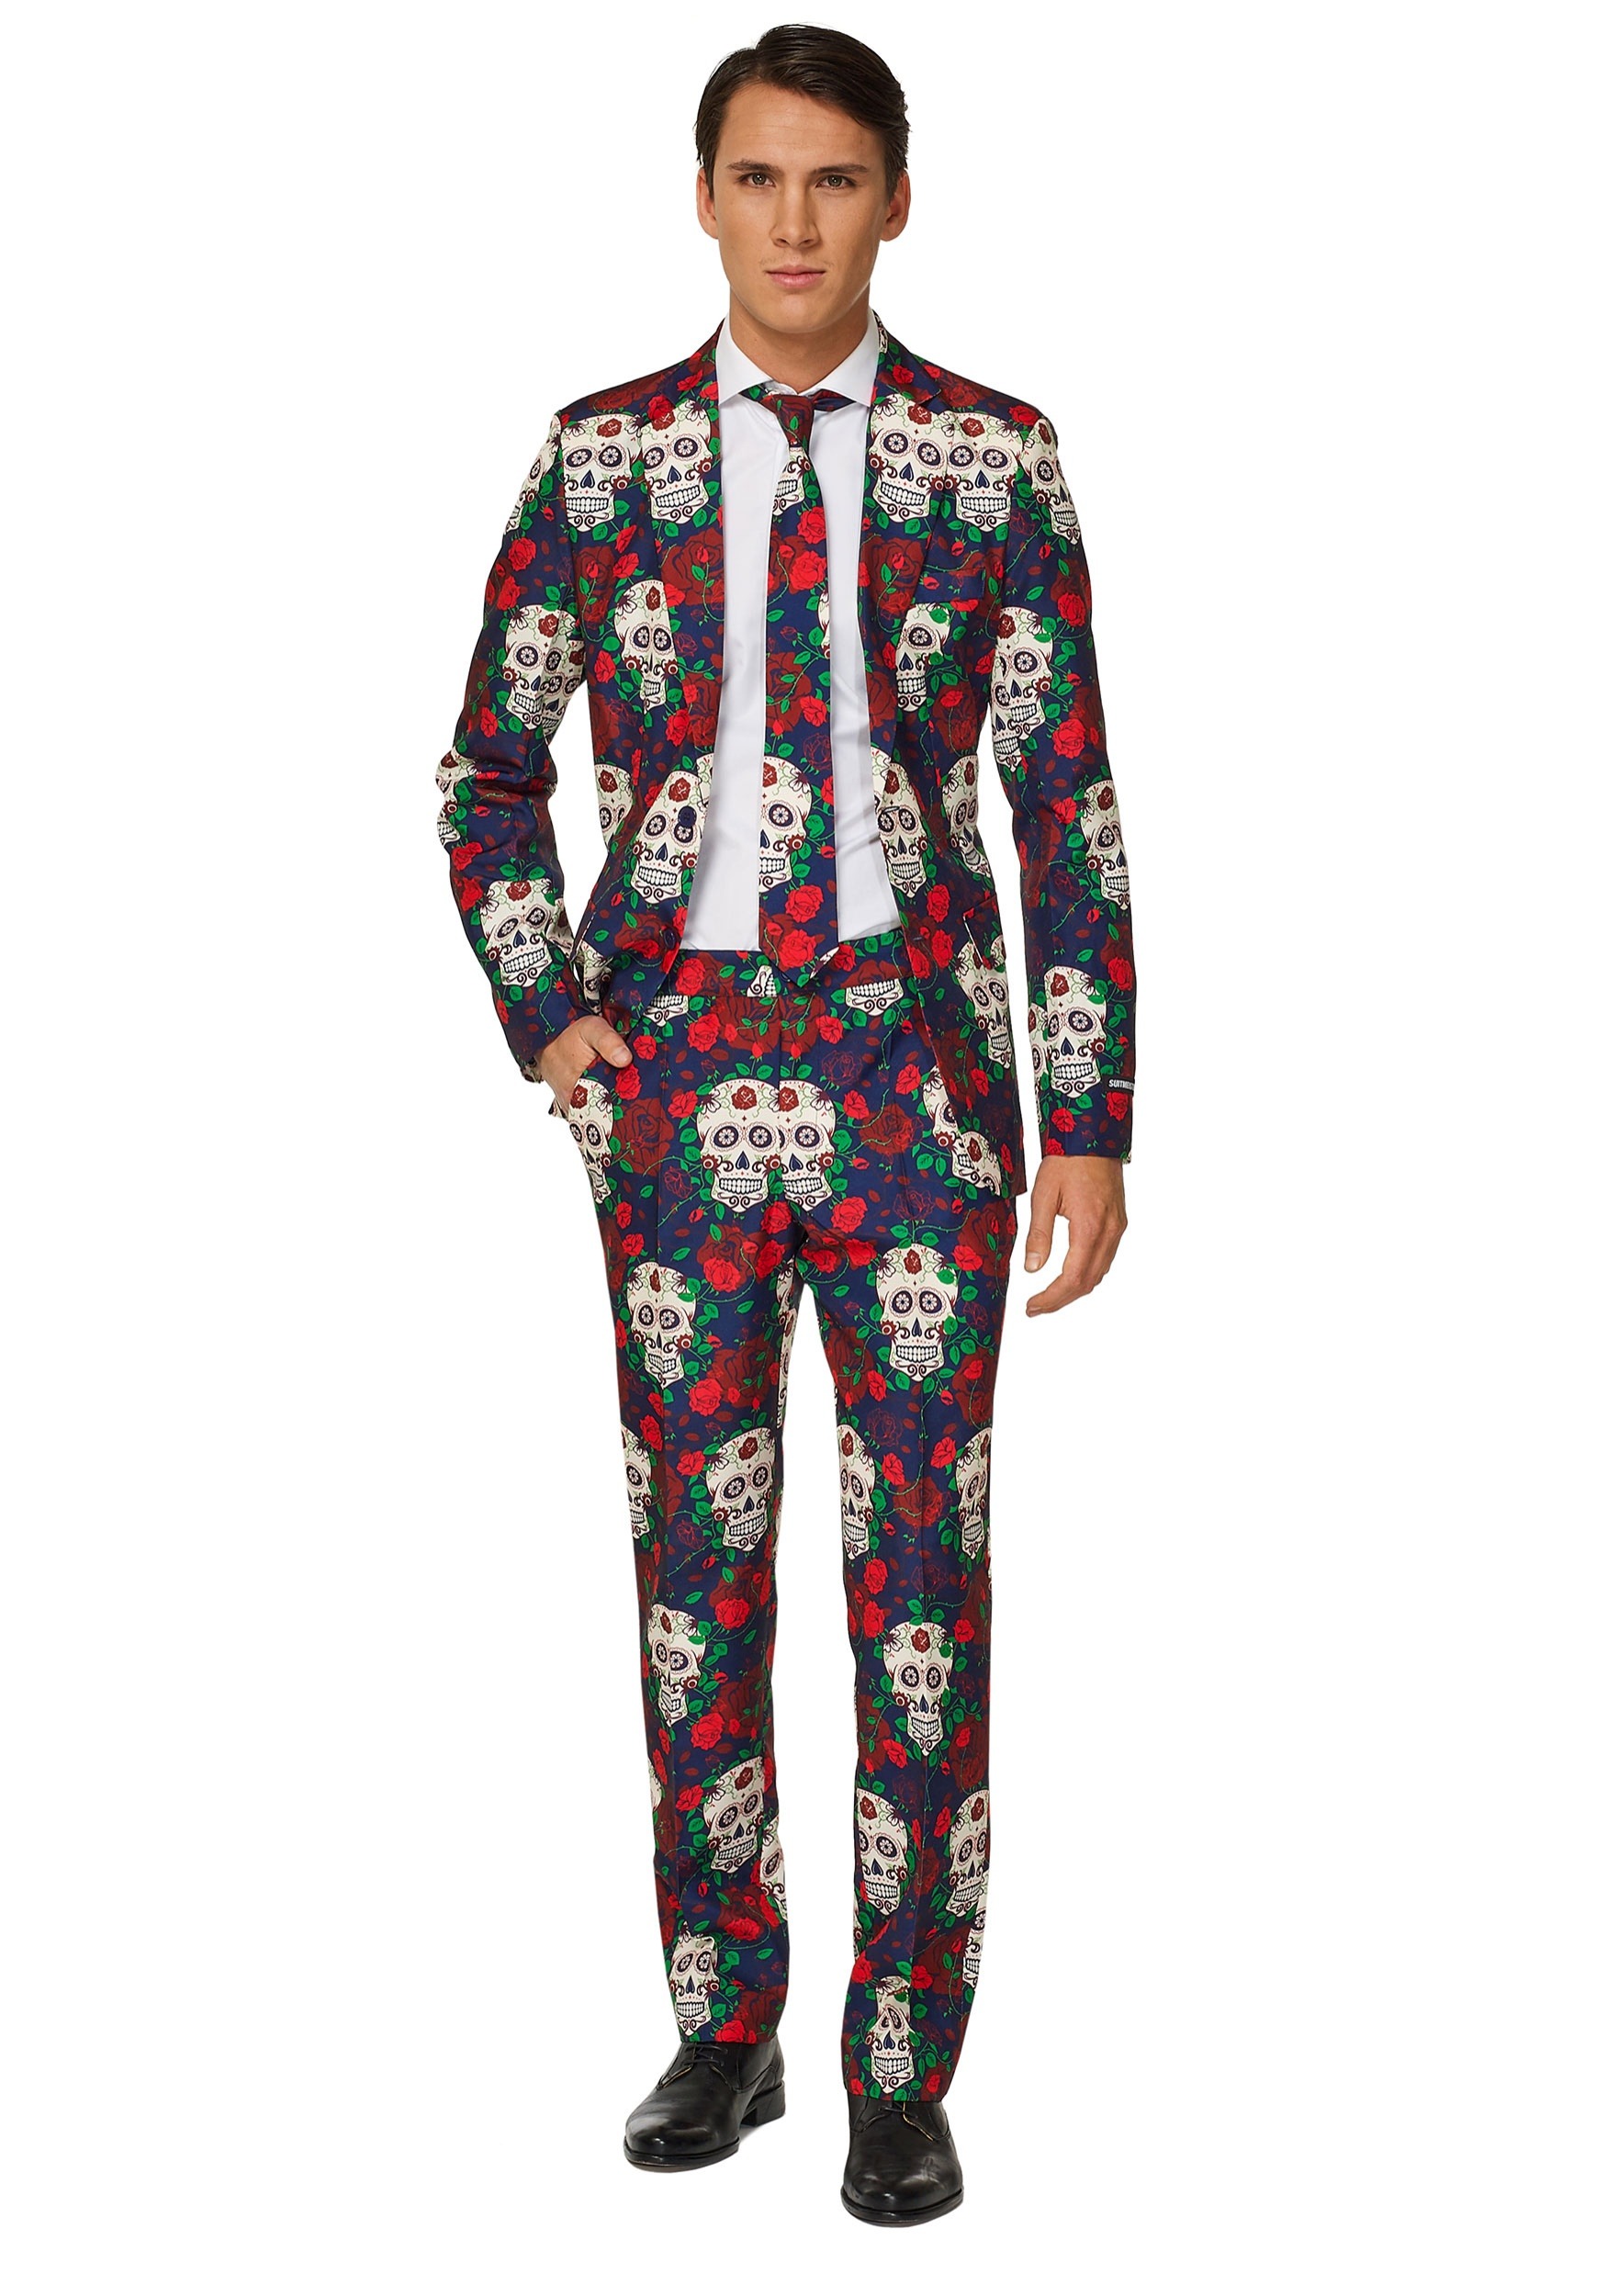 Image of Day of the Dead Men's Suitmeister Suit Costume ID OSOBAS0042-M